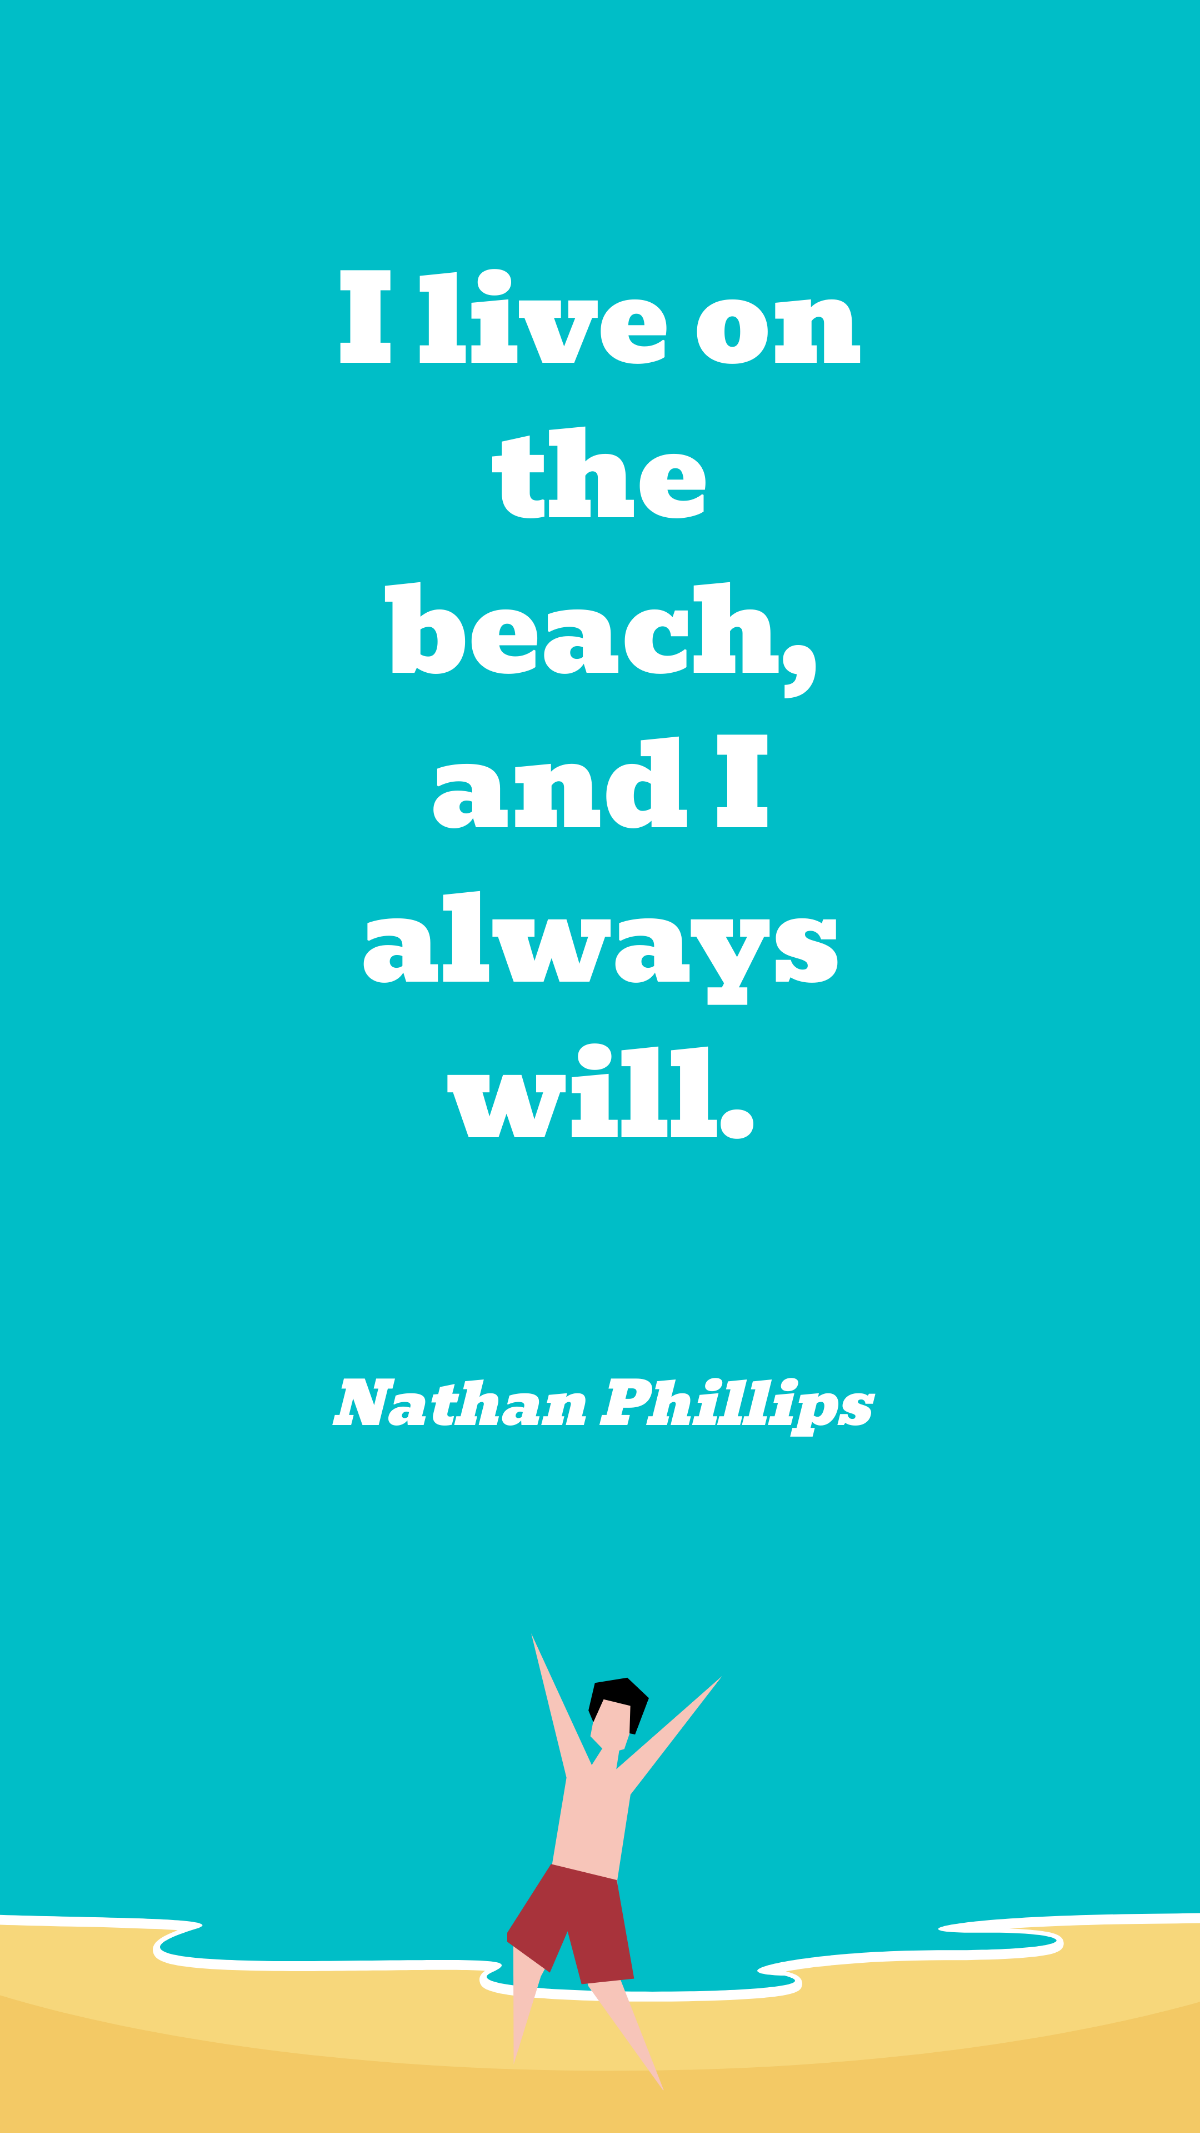 Free Nathan Phillips - I live on the beach, and I always will. Template